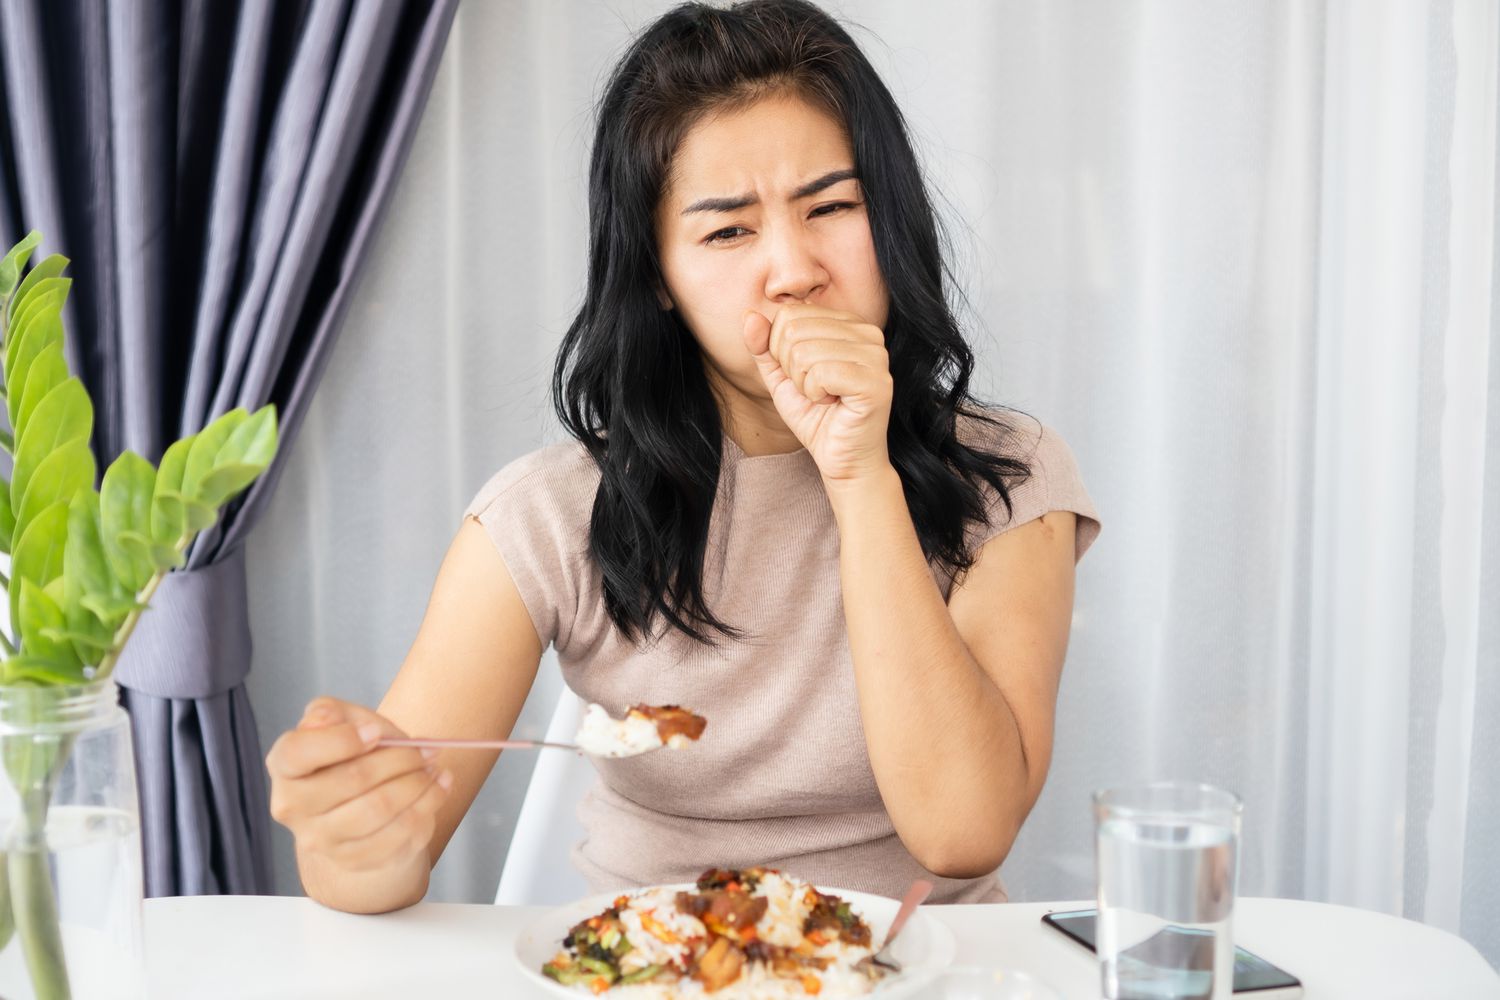 Why Do I Cough After I Eat? Can I Stop It?